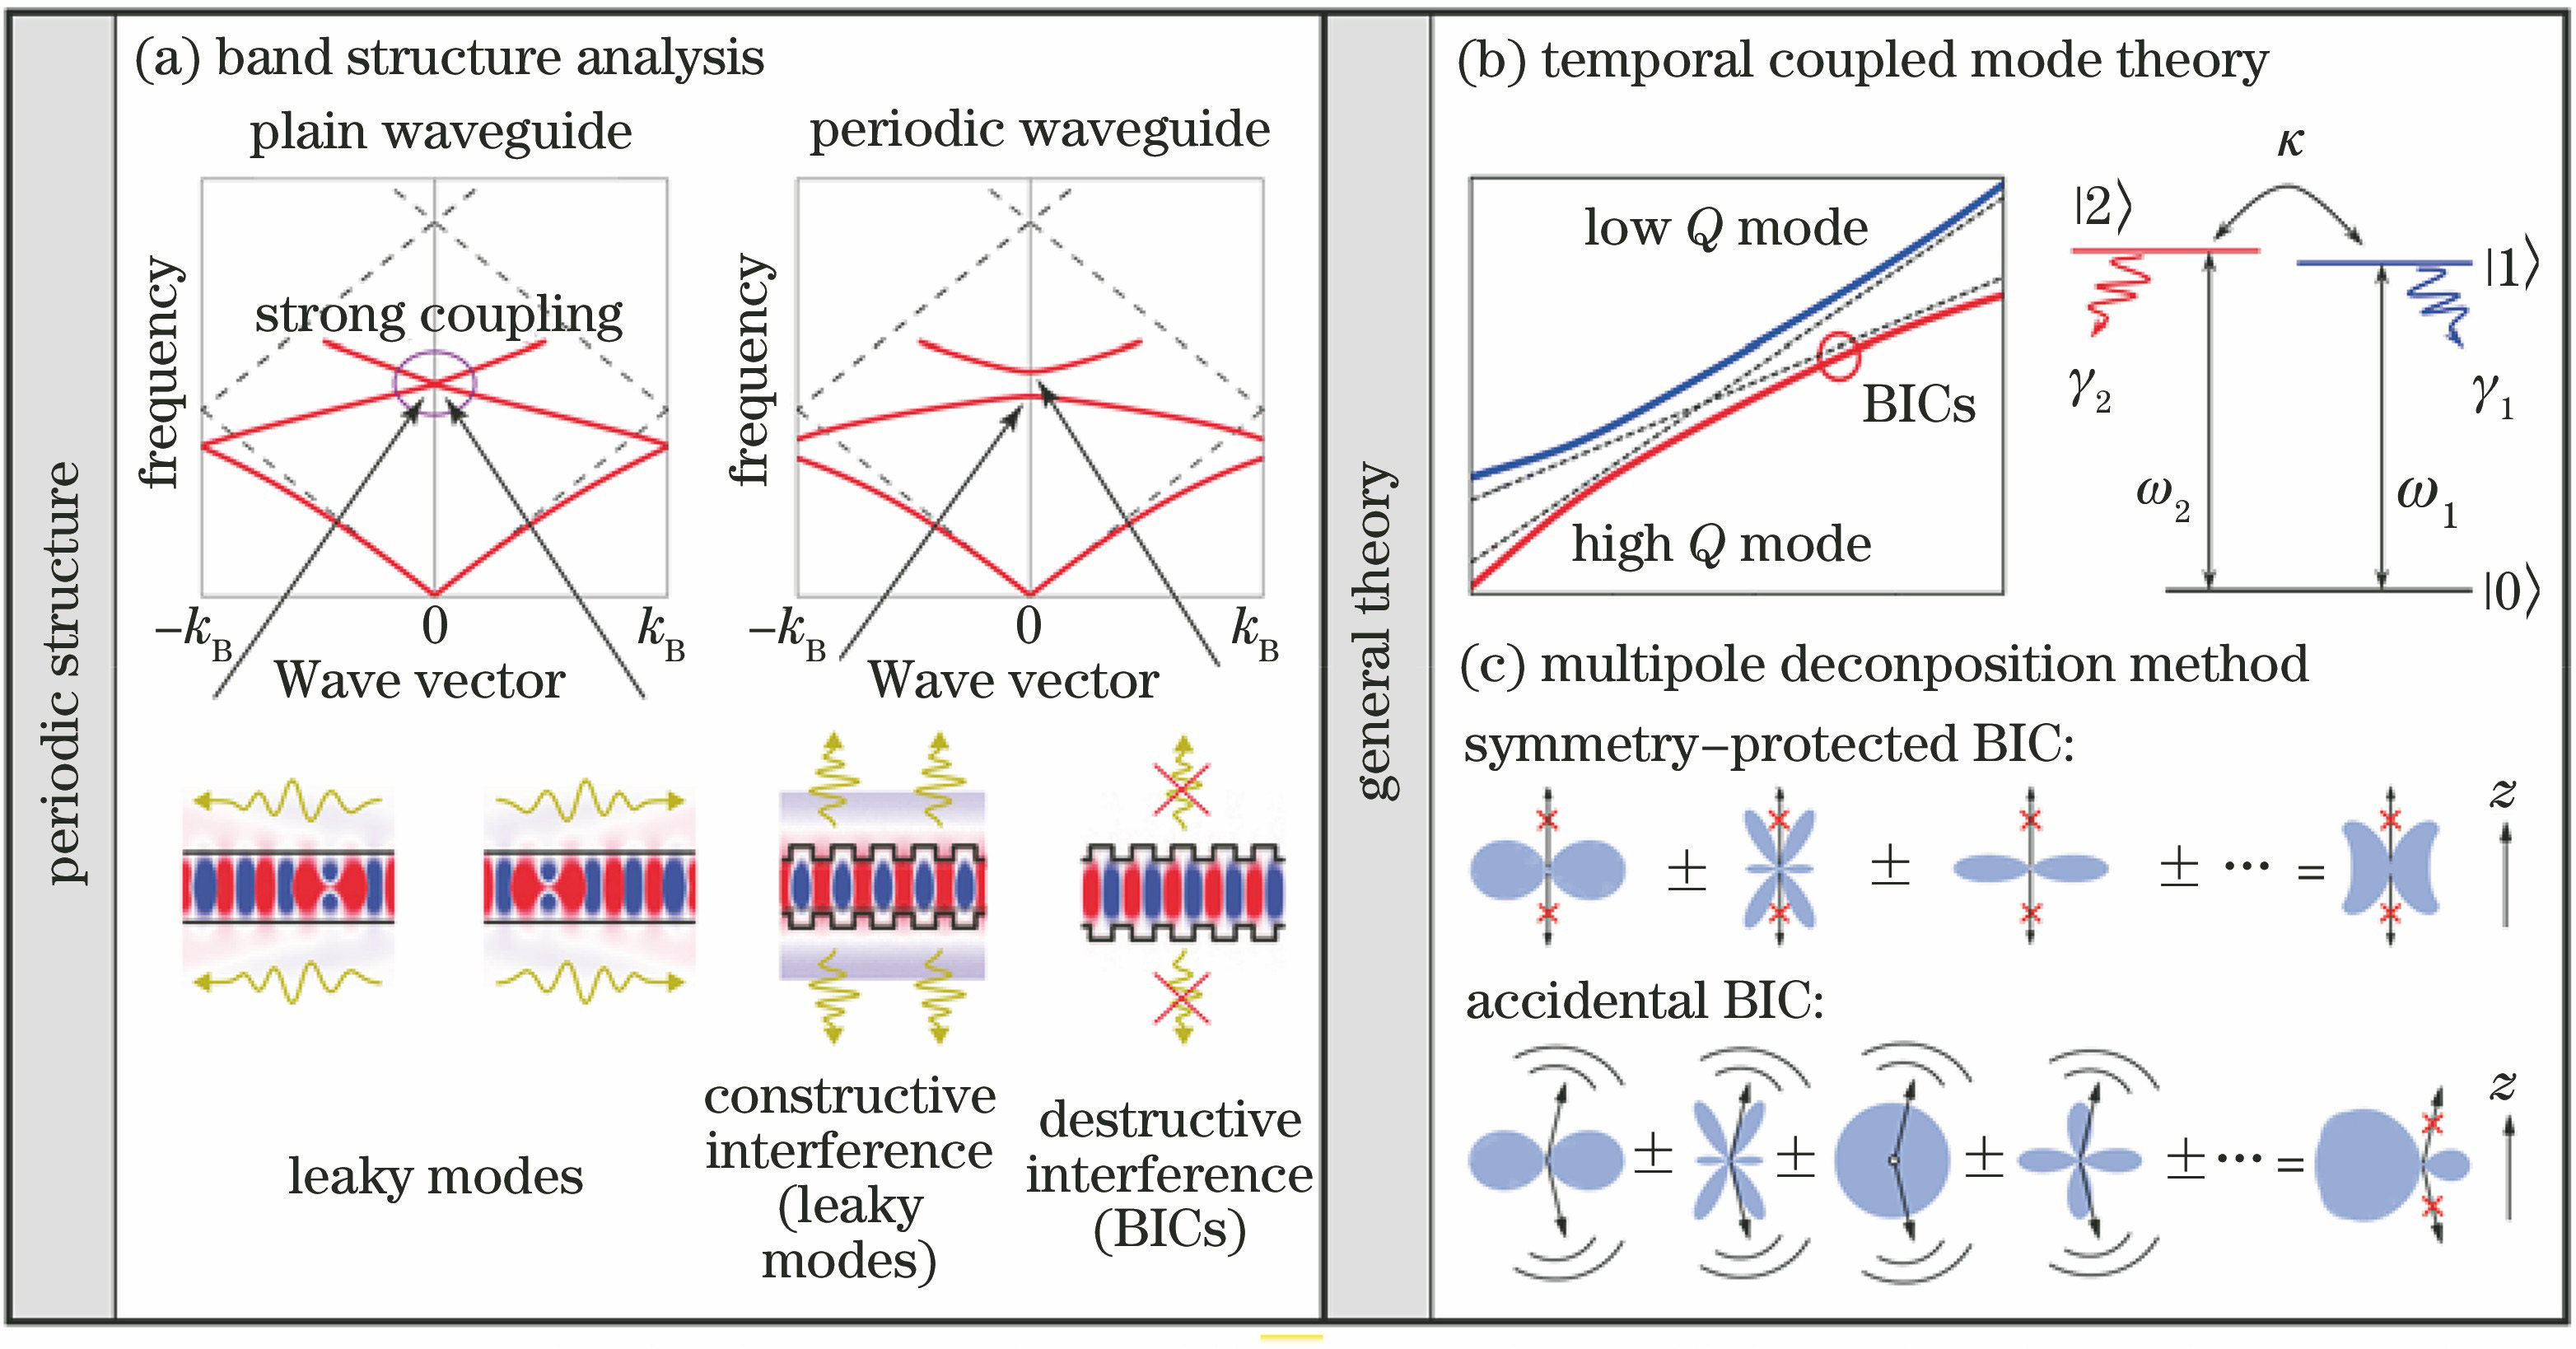 Physical mechanism of optical BICs. (a) Periodic photon structure[35]; (b) temporal coupled mode theory; (c) multipole deconposition method[37]